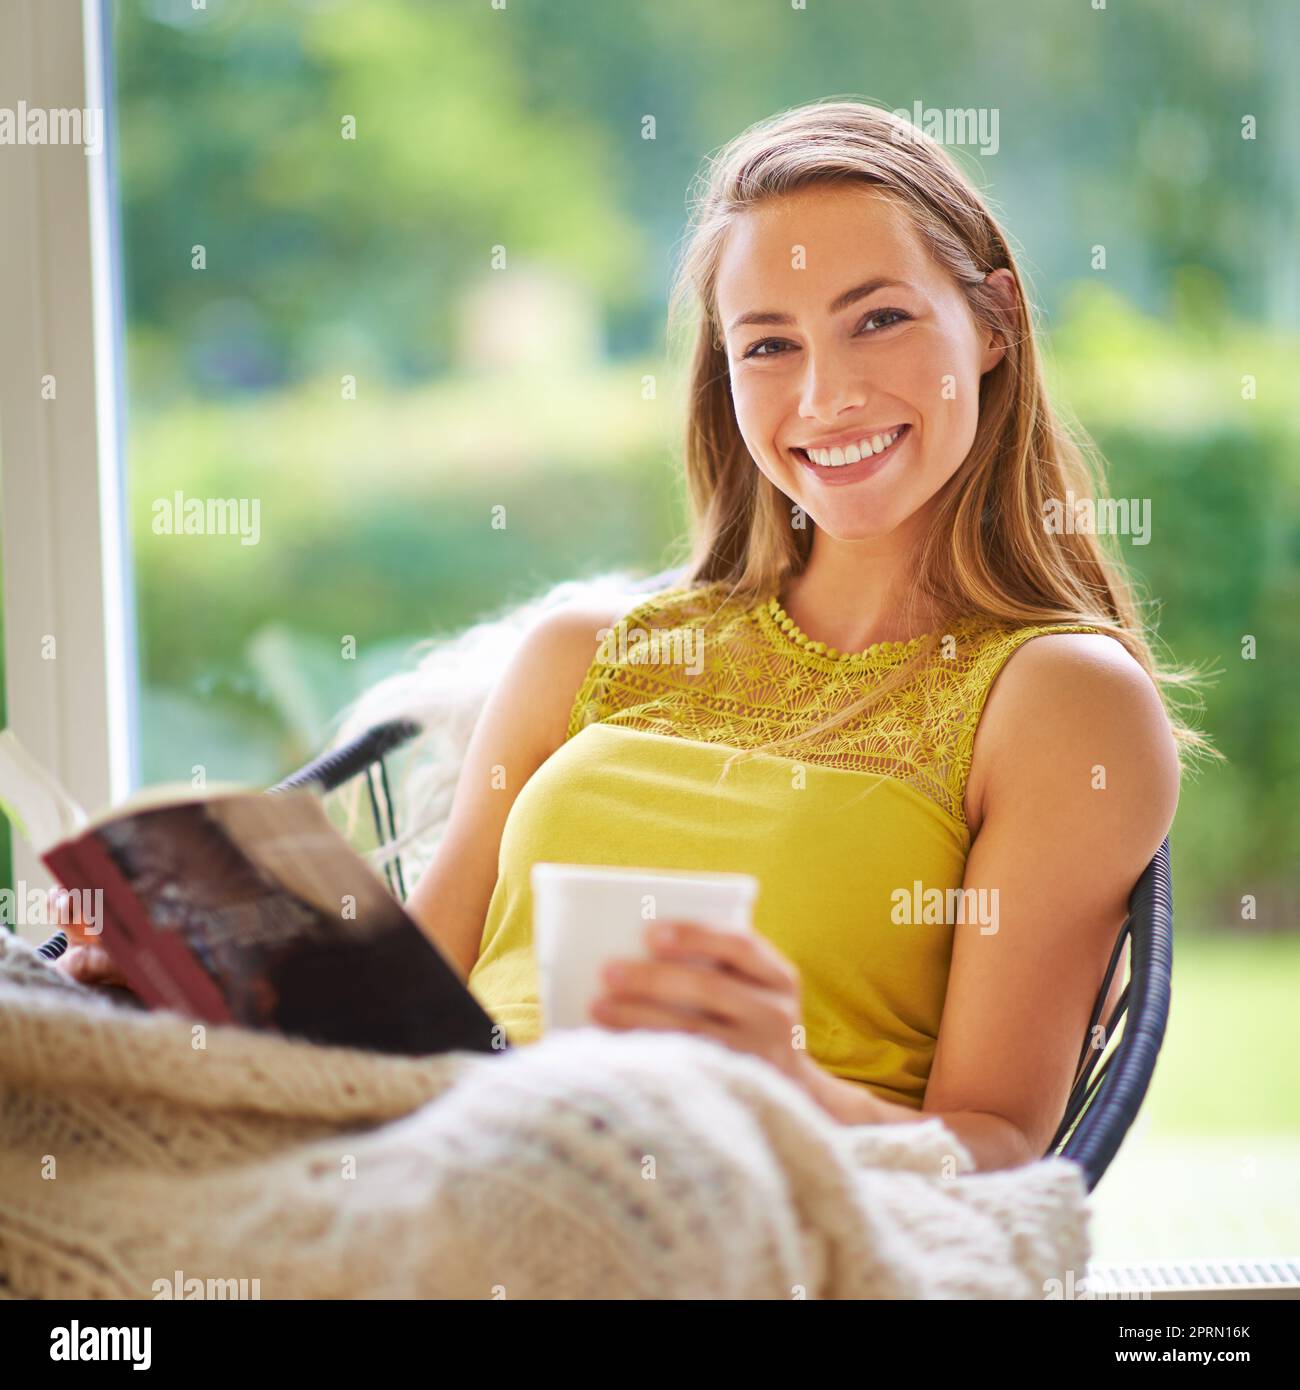 This is how I spend my free time. Portrait of a young woman reading a book at home. Stock Photo